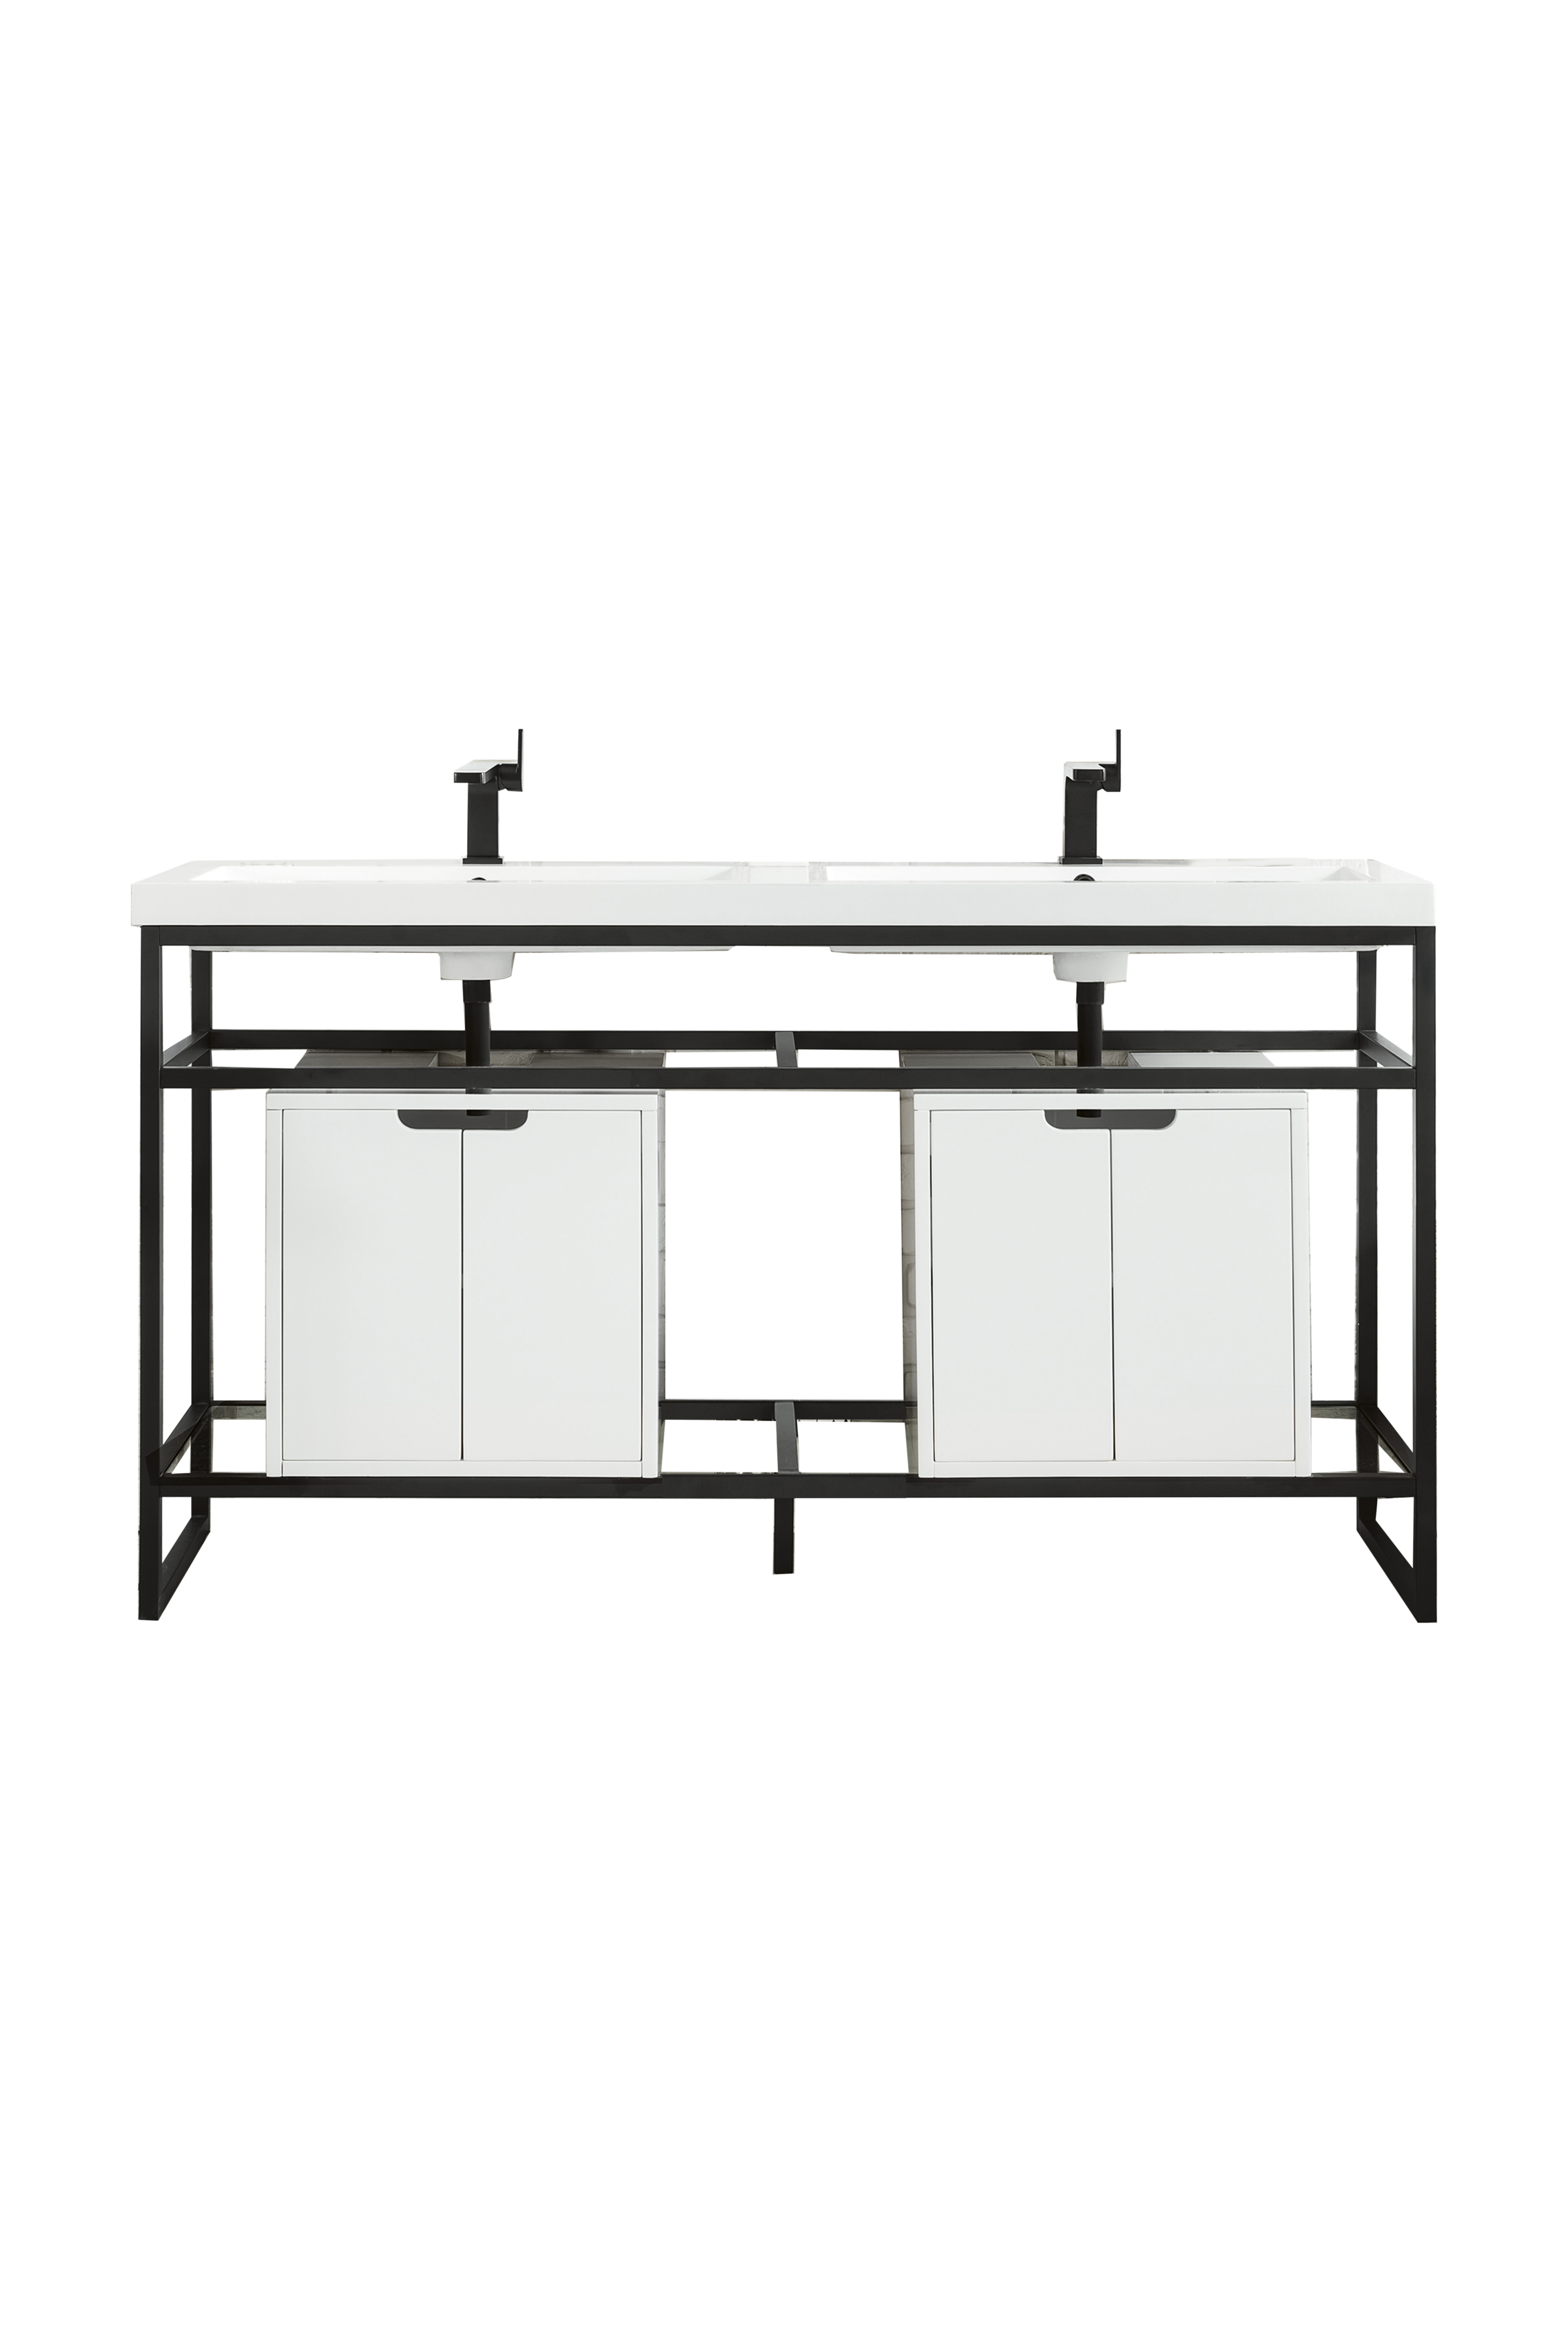 James Martin C105V63MBKSCGWWG Boston 63" Stainless Steel Sink Console (Double Basins), Matte Black w/ Glossy White Storage Cabinet, White Glossy Composite Countertop